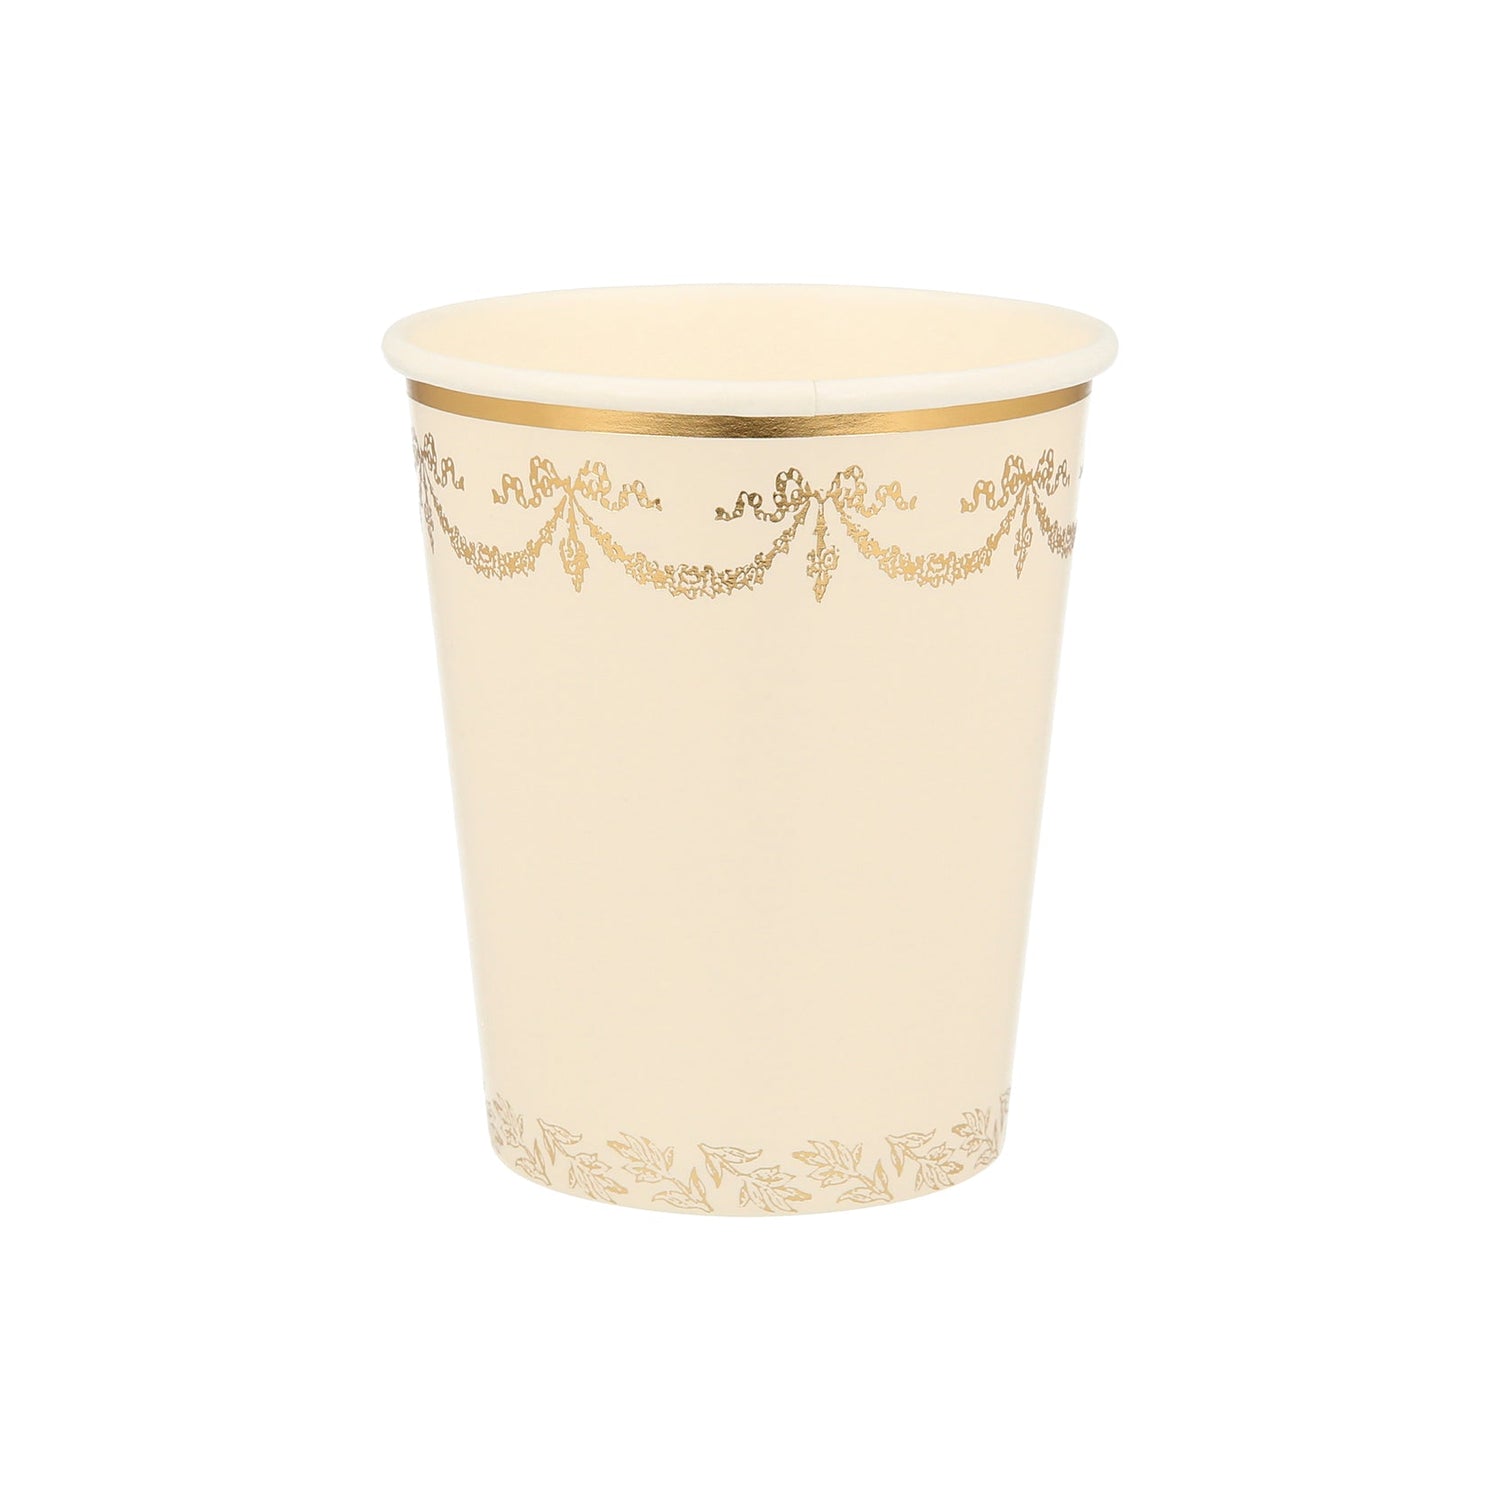 A collaboration between Ladurée Paris Cups and Meri Meri, featuring a white paper cup with gold trim.